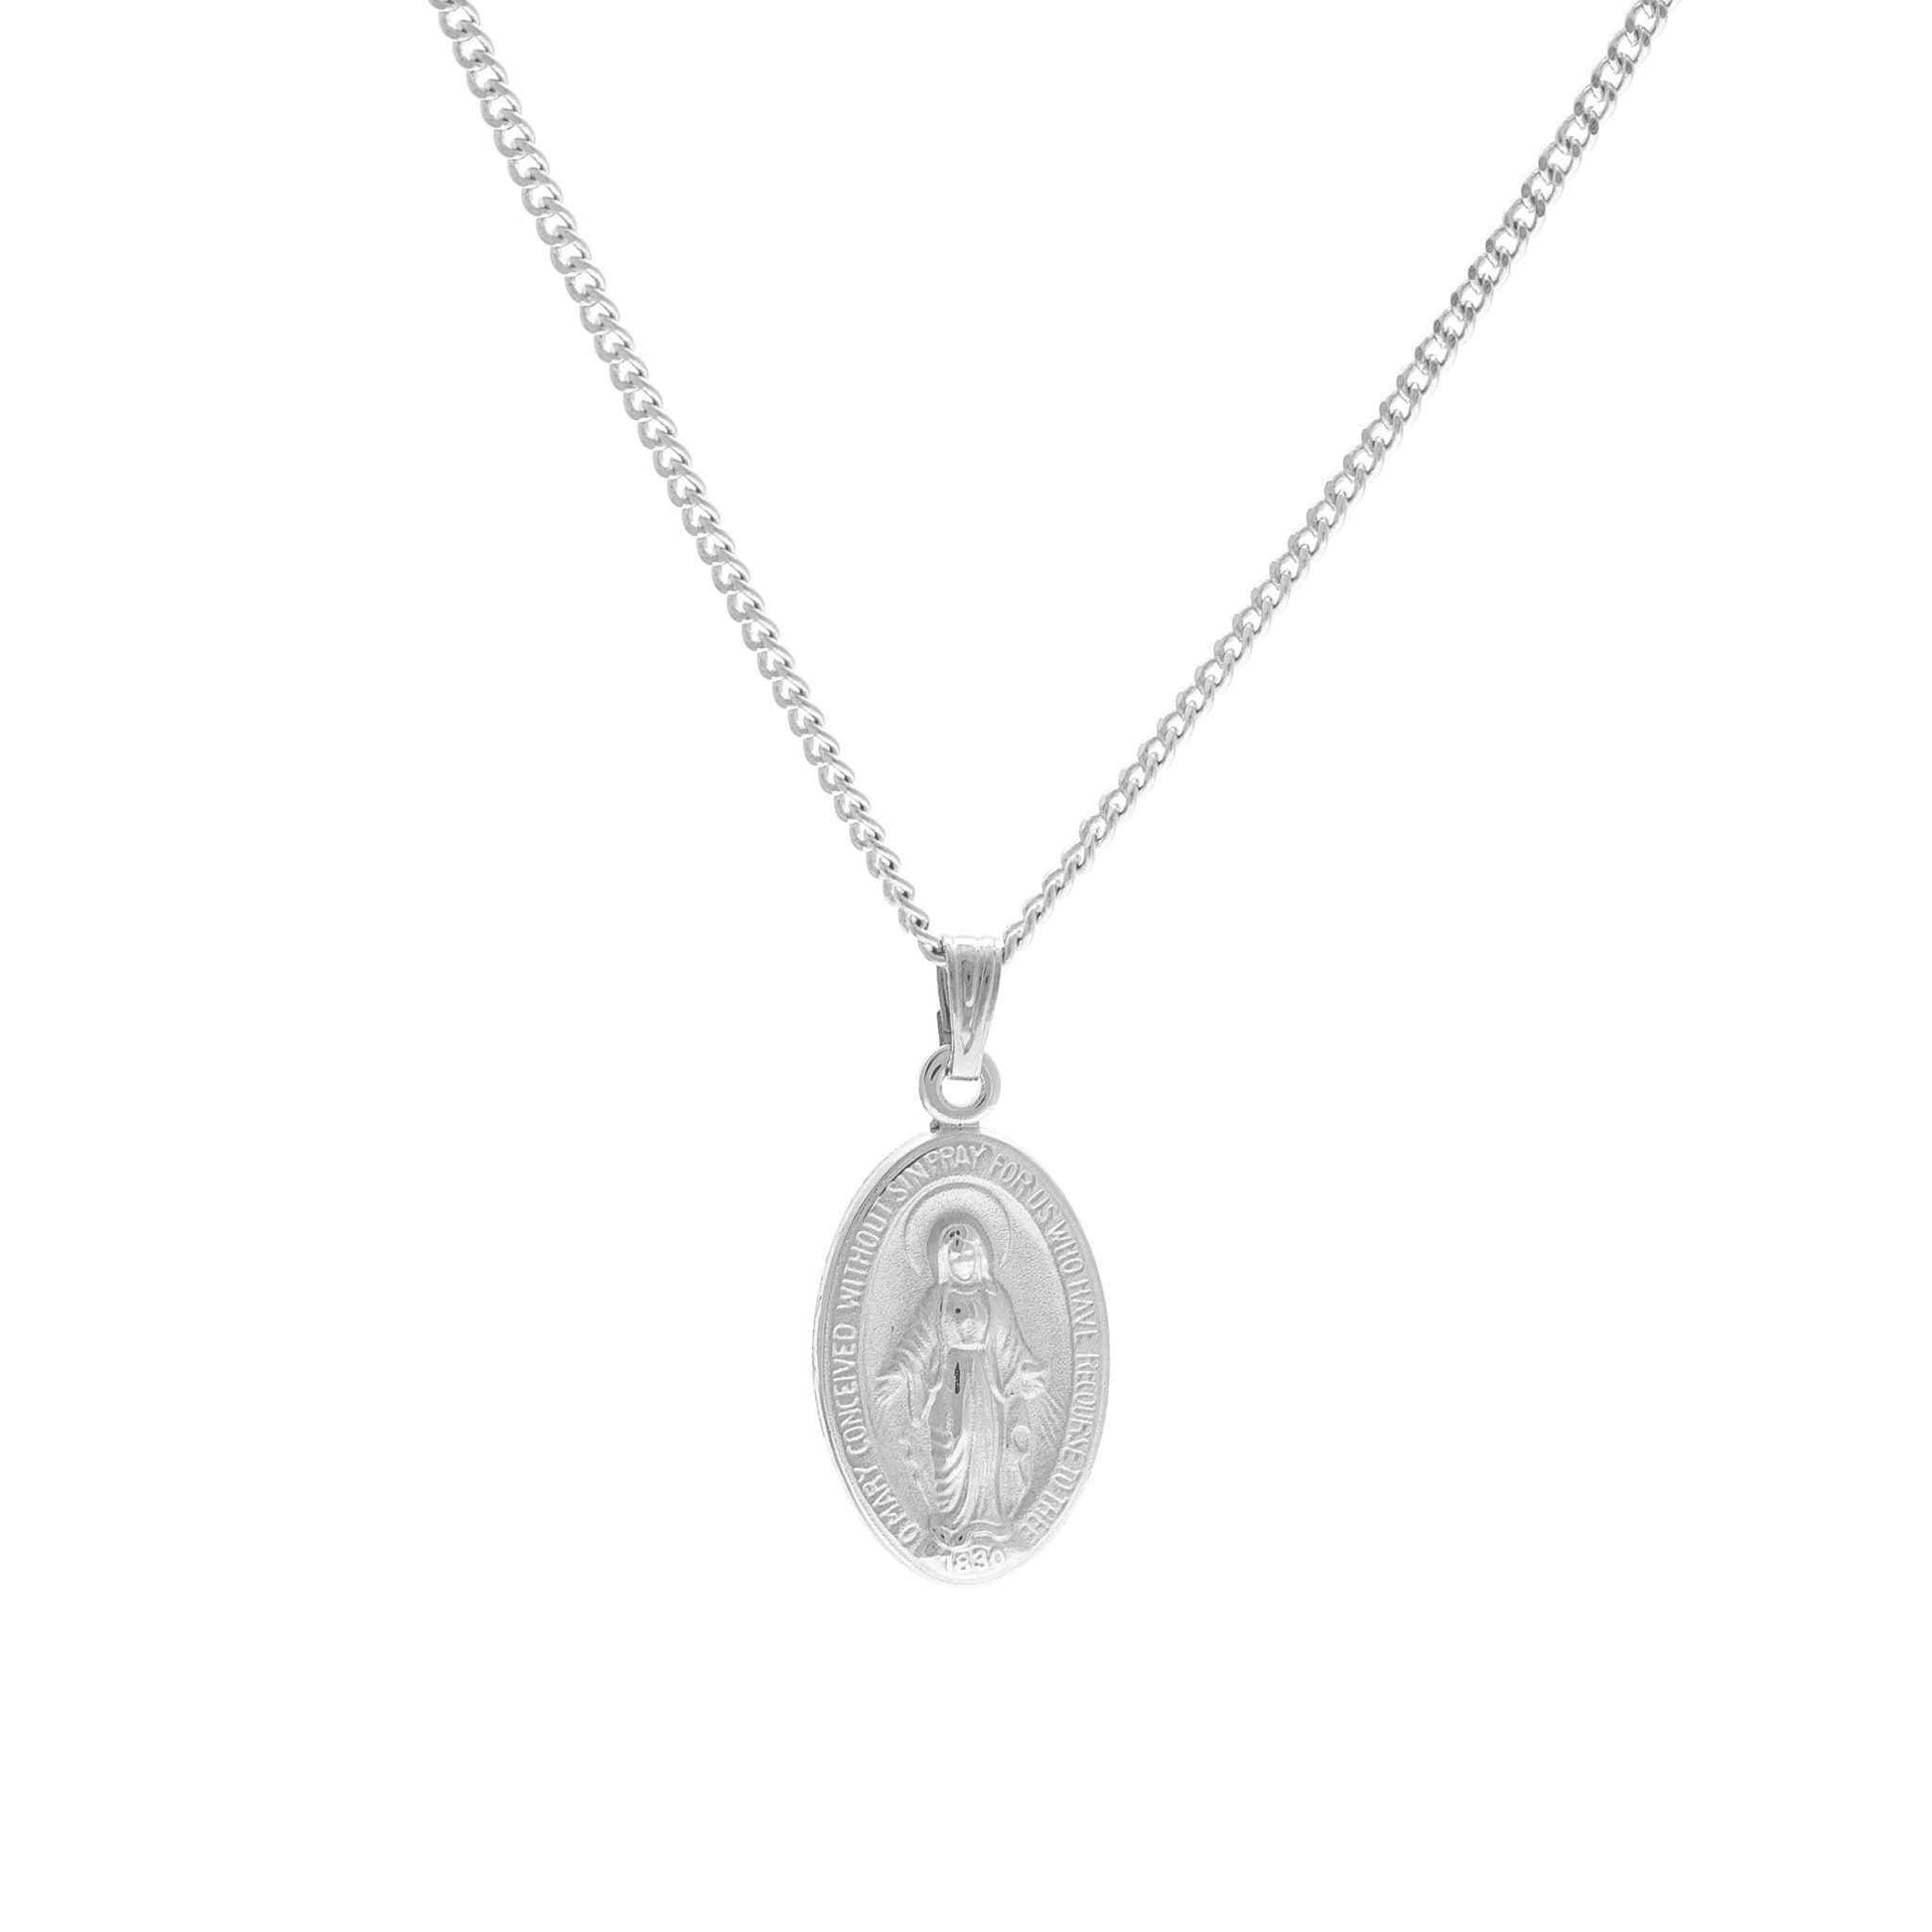 A miraculous mary medal displayed on a neutral white background.